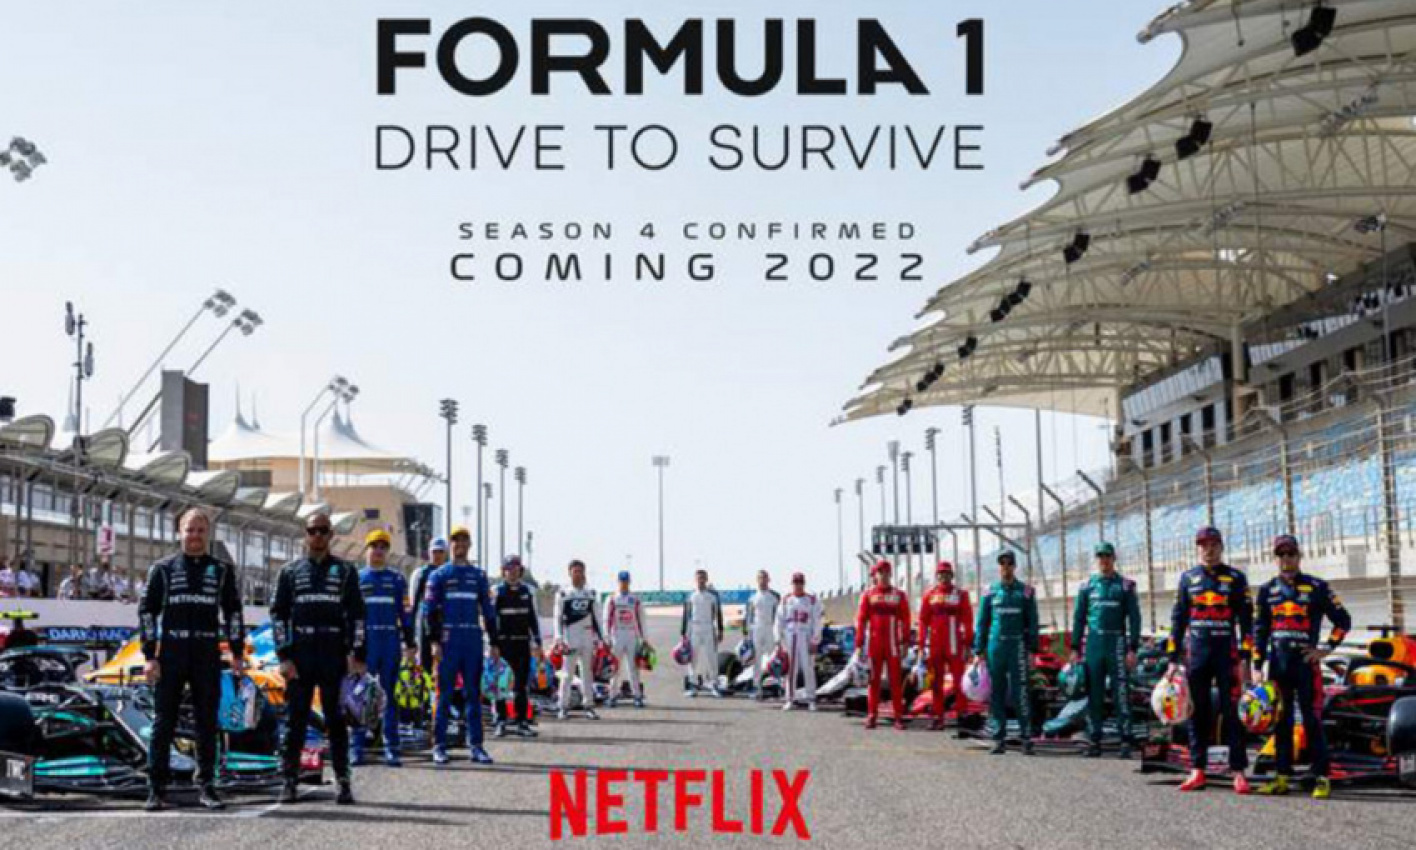 autos, cars, formula 1, ram, drive to survive, drive to survive season 4, lewis hamilton, max verstappen, mercedes-amg petronas, netflix, red bull racing, popular netflix series drive to survive to air in march after dramatic finale